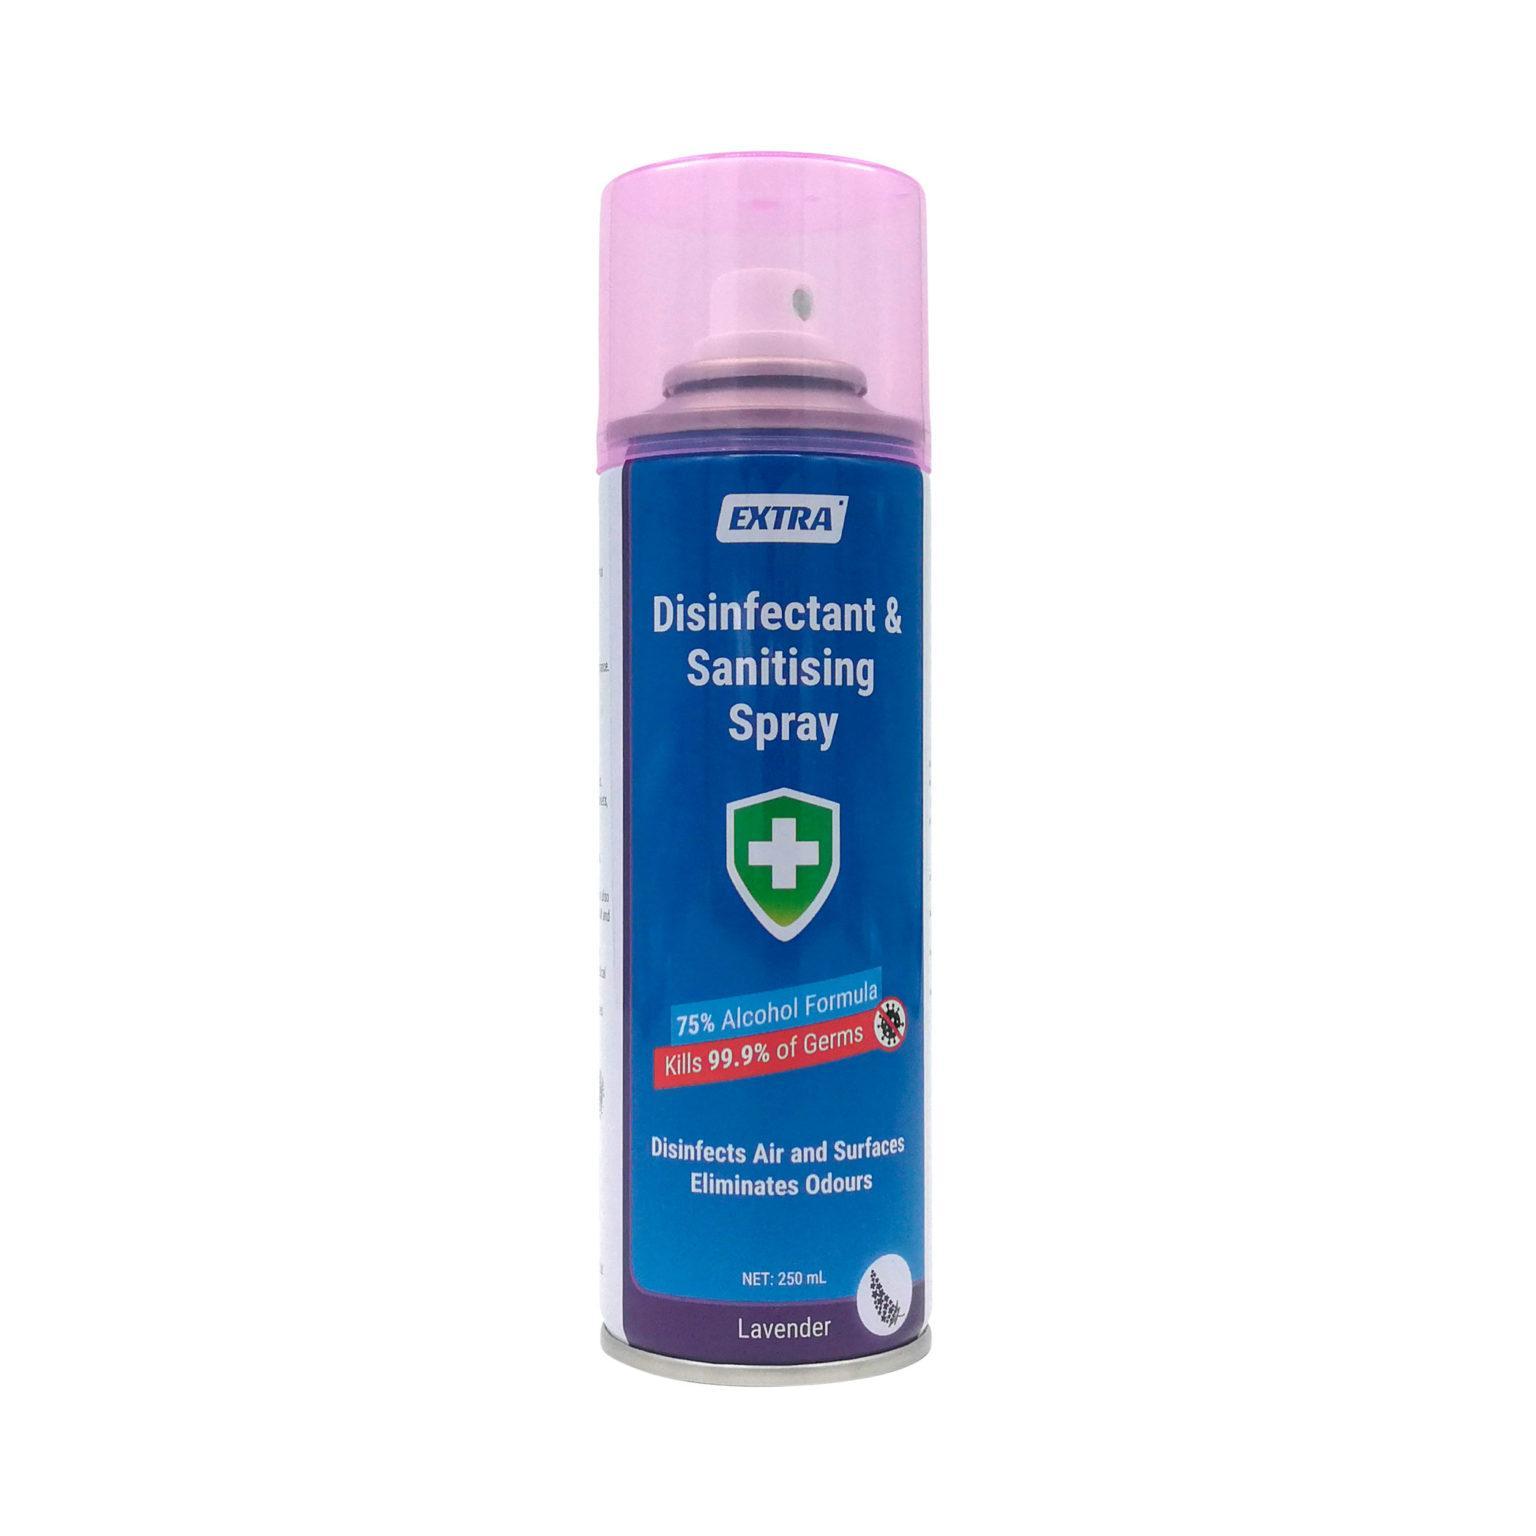 Extra Disinfectant Surface Sanitiser Spray 75 Alcohol Lavender 250 mL front